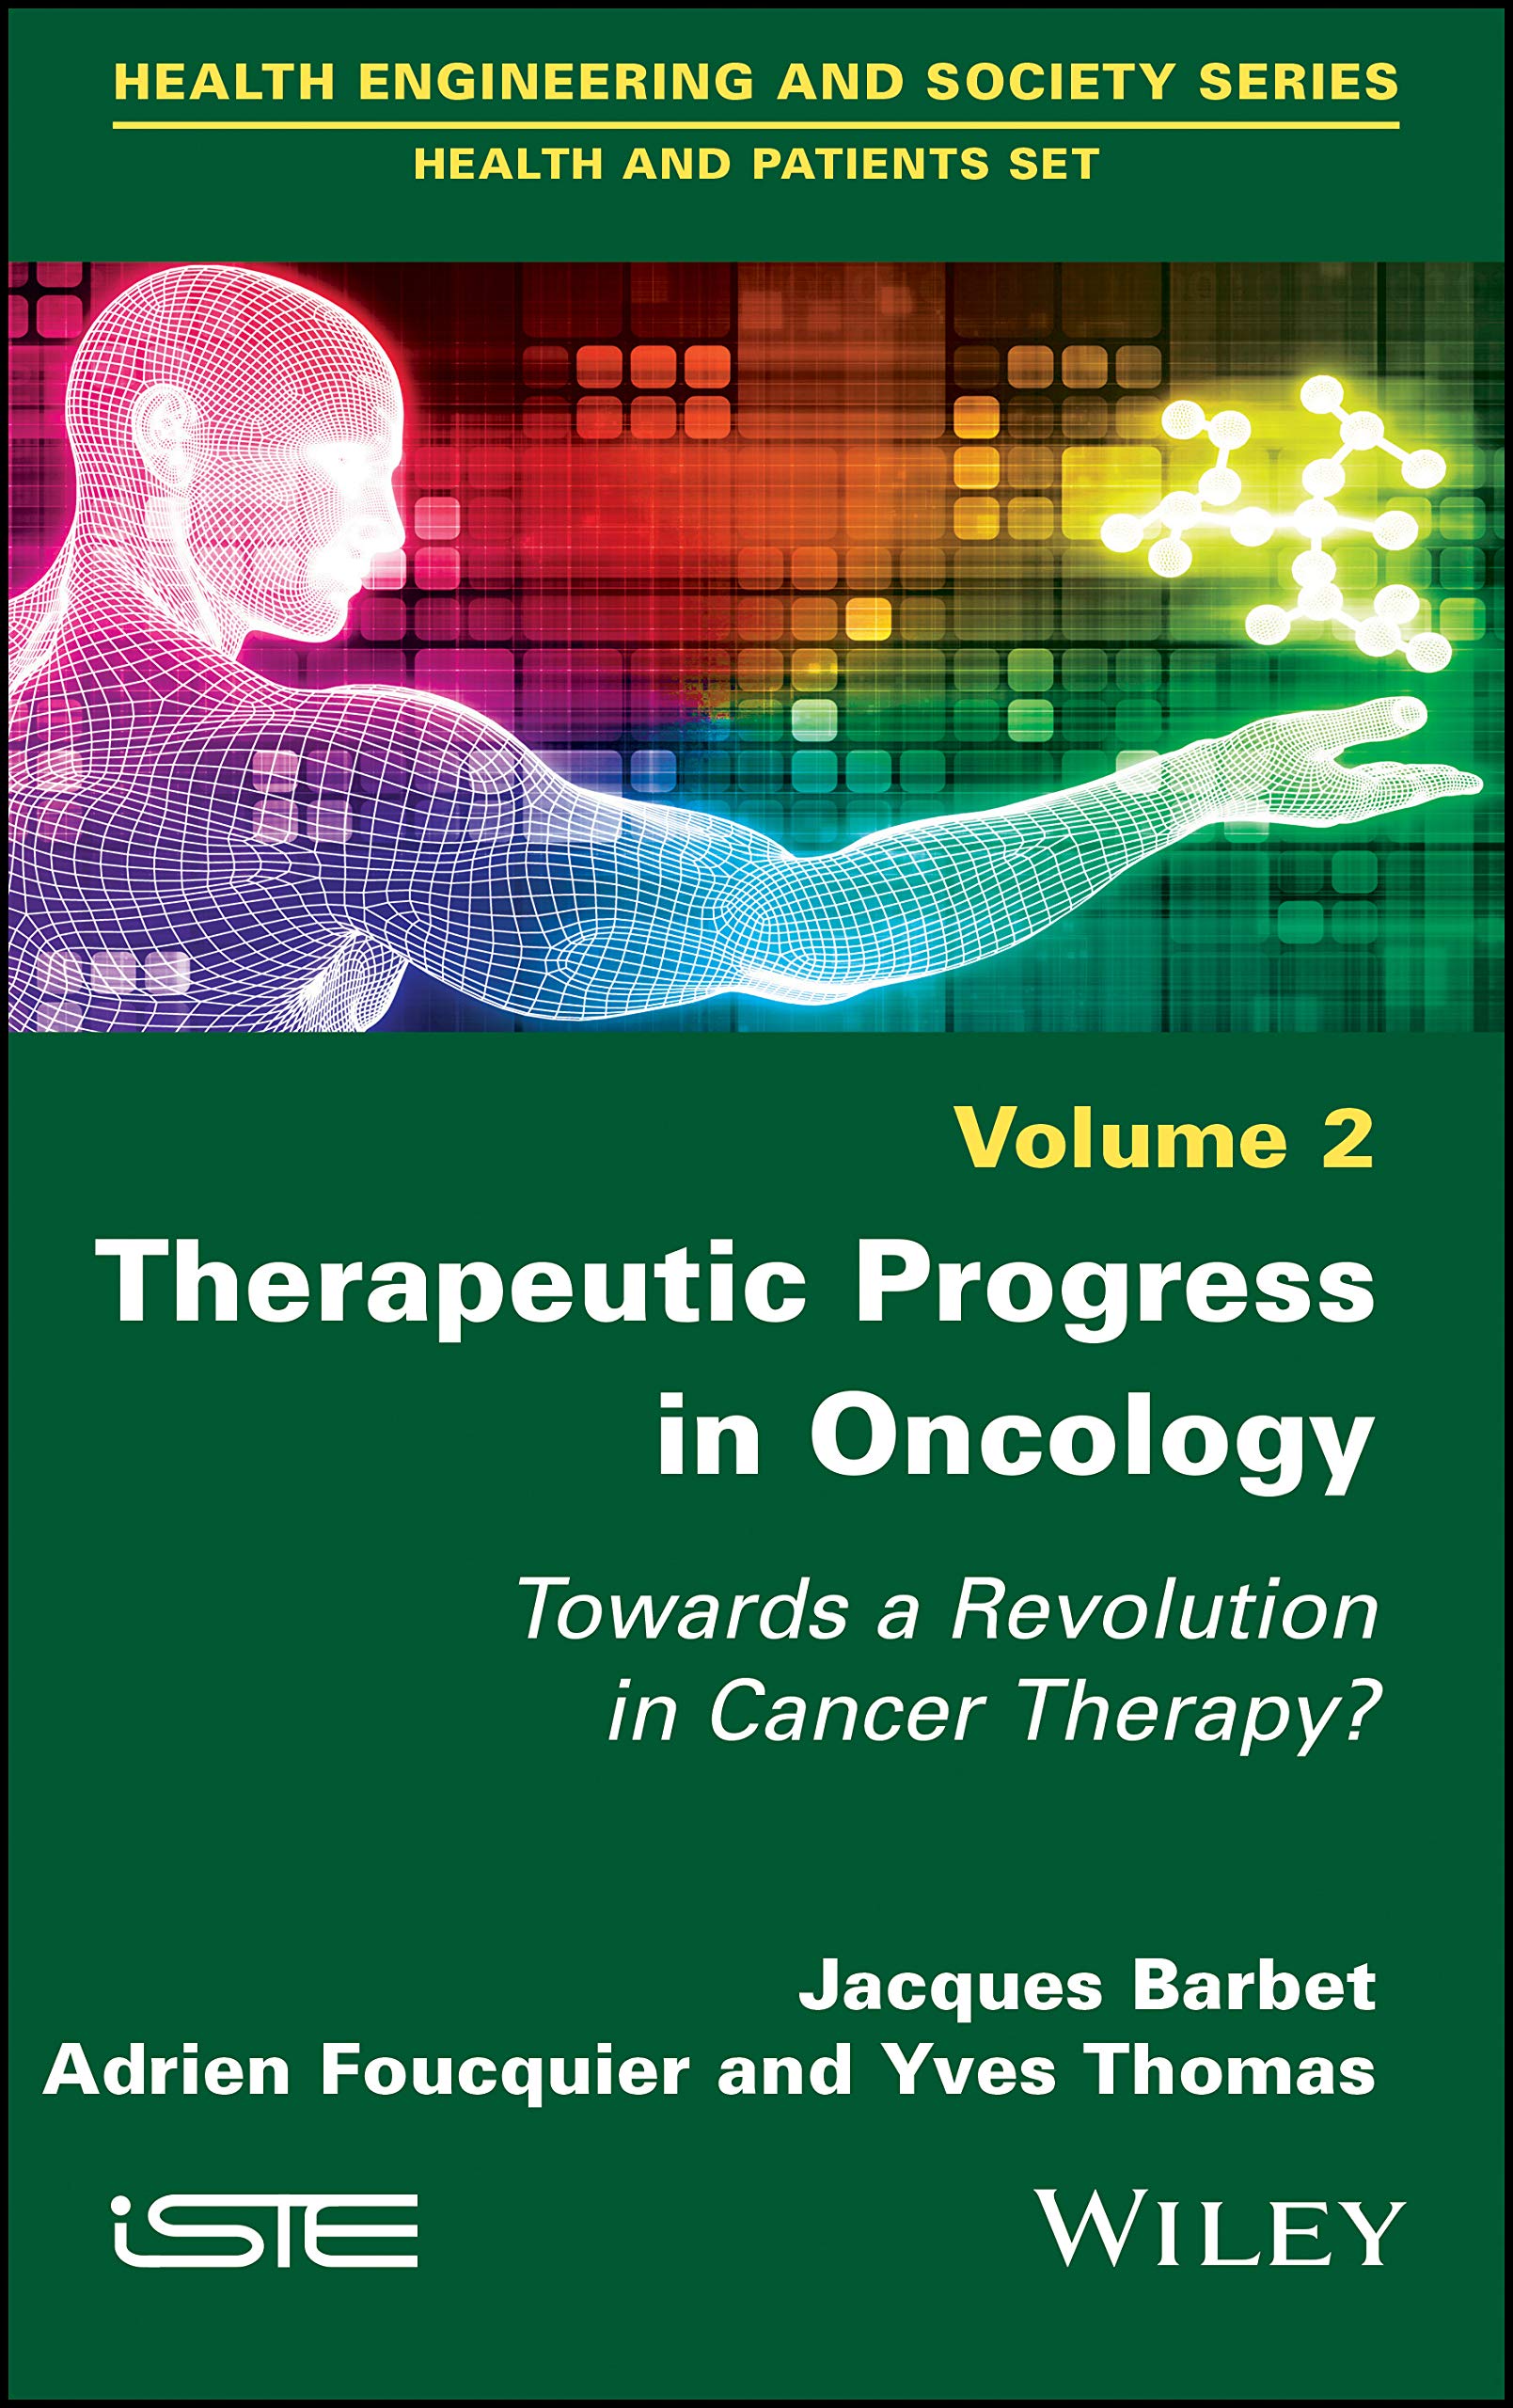 Therapeutic Progress in Oncology | Jacques Barbet, Adrien Foucquier, Yves Thomas